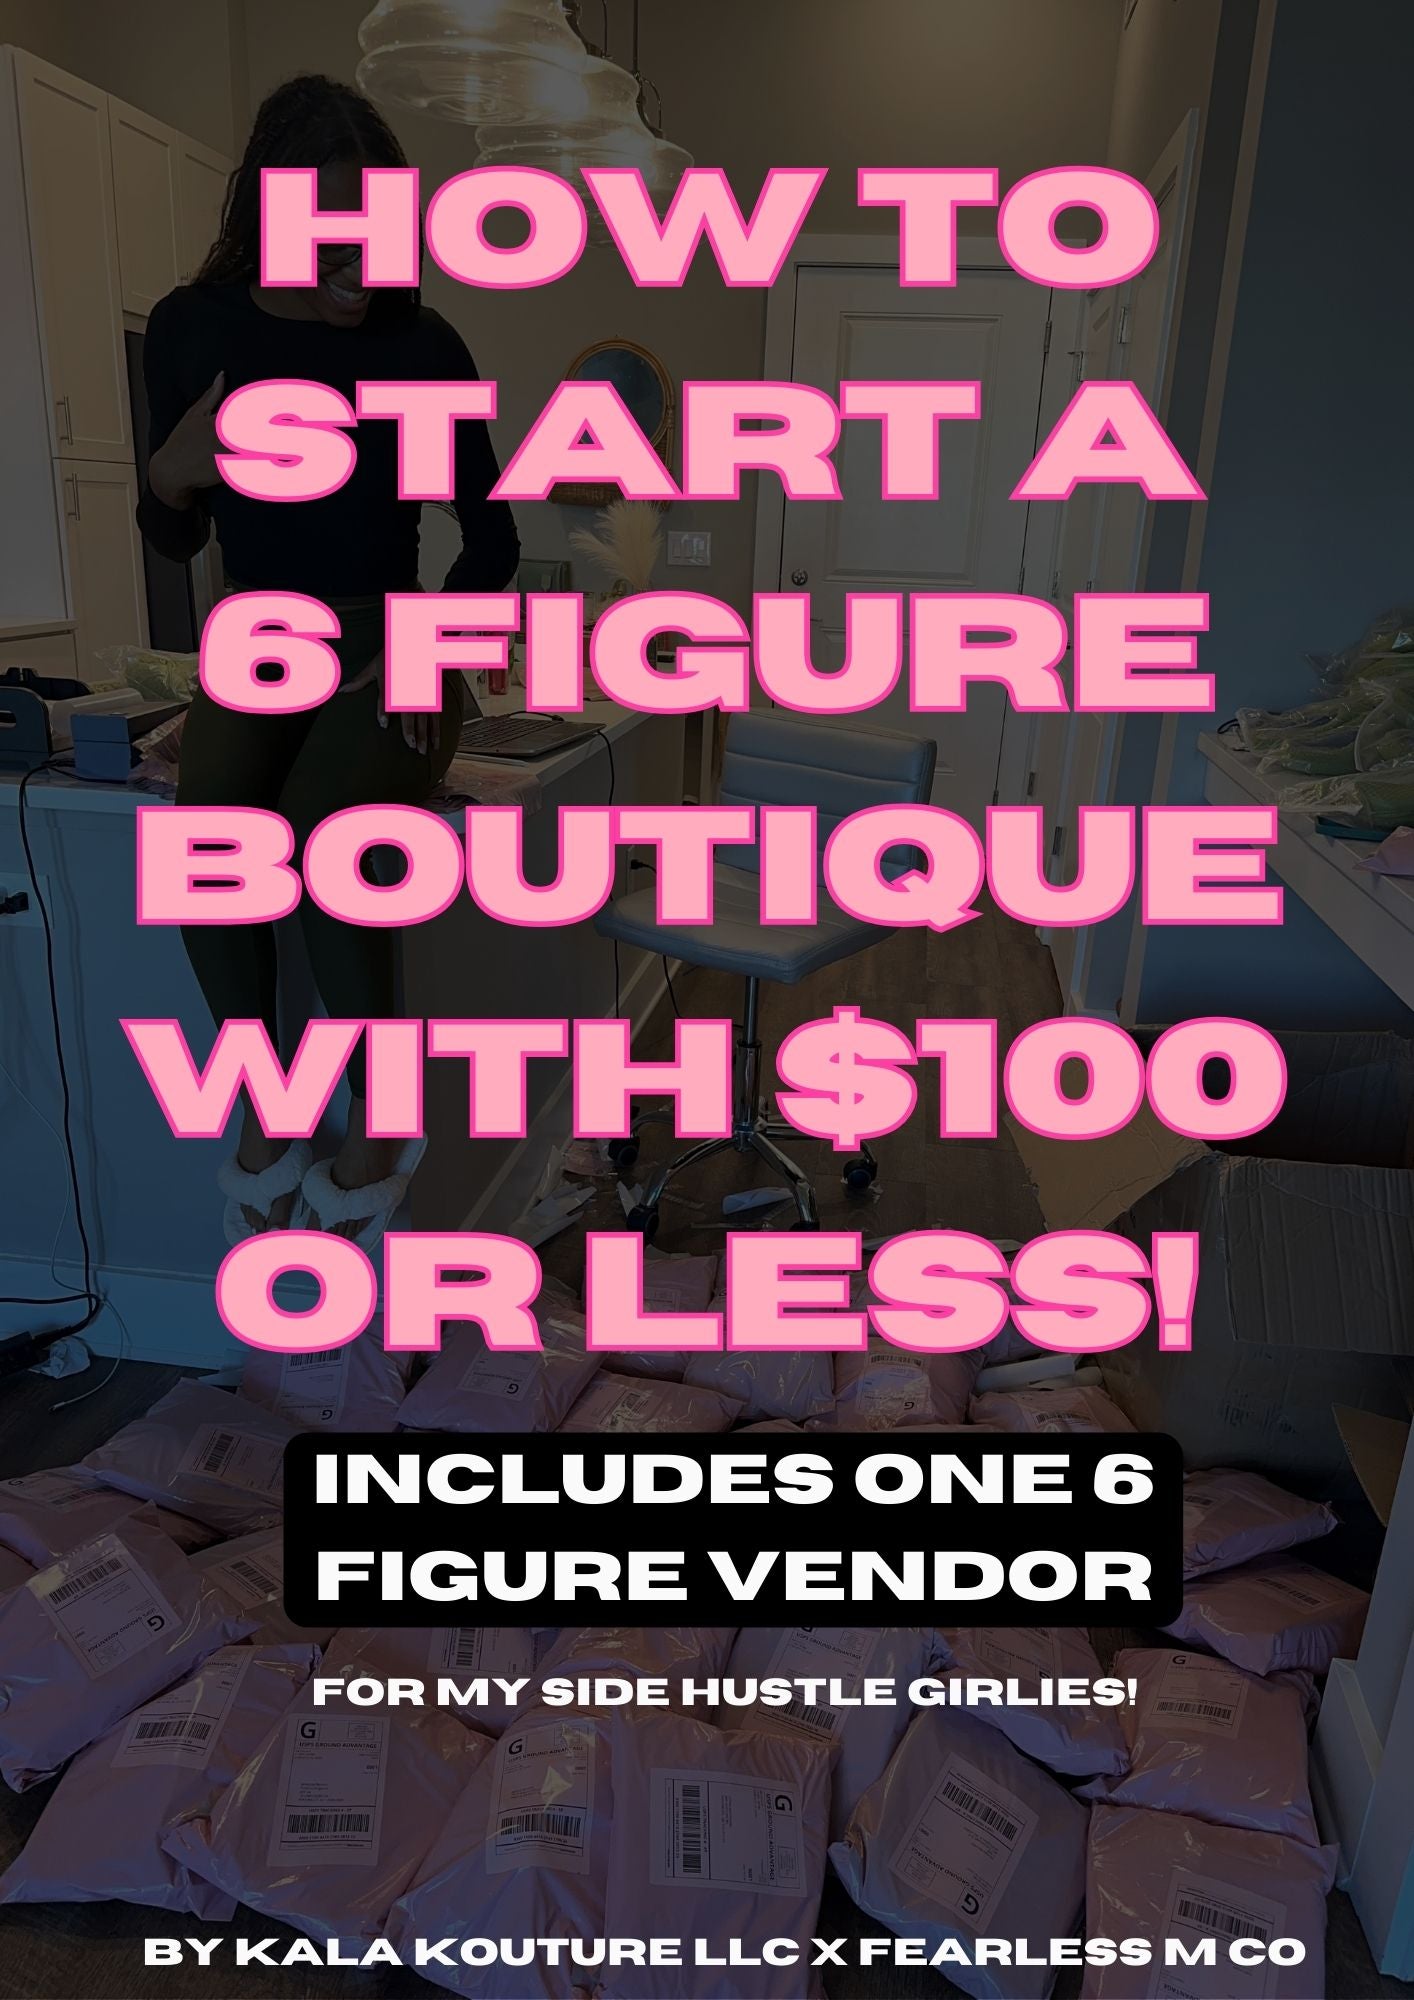 One 6 Figure Vendor + How to start an online boutique with $100 or less guide!